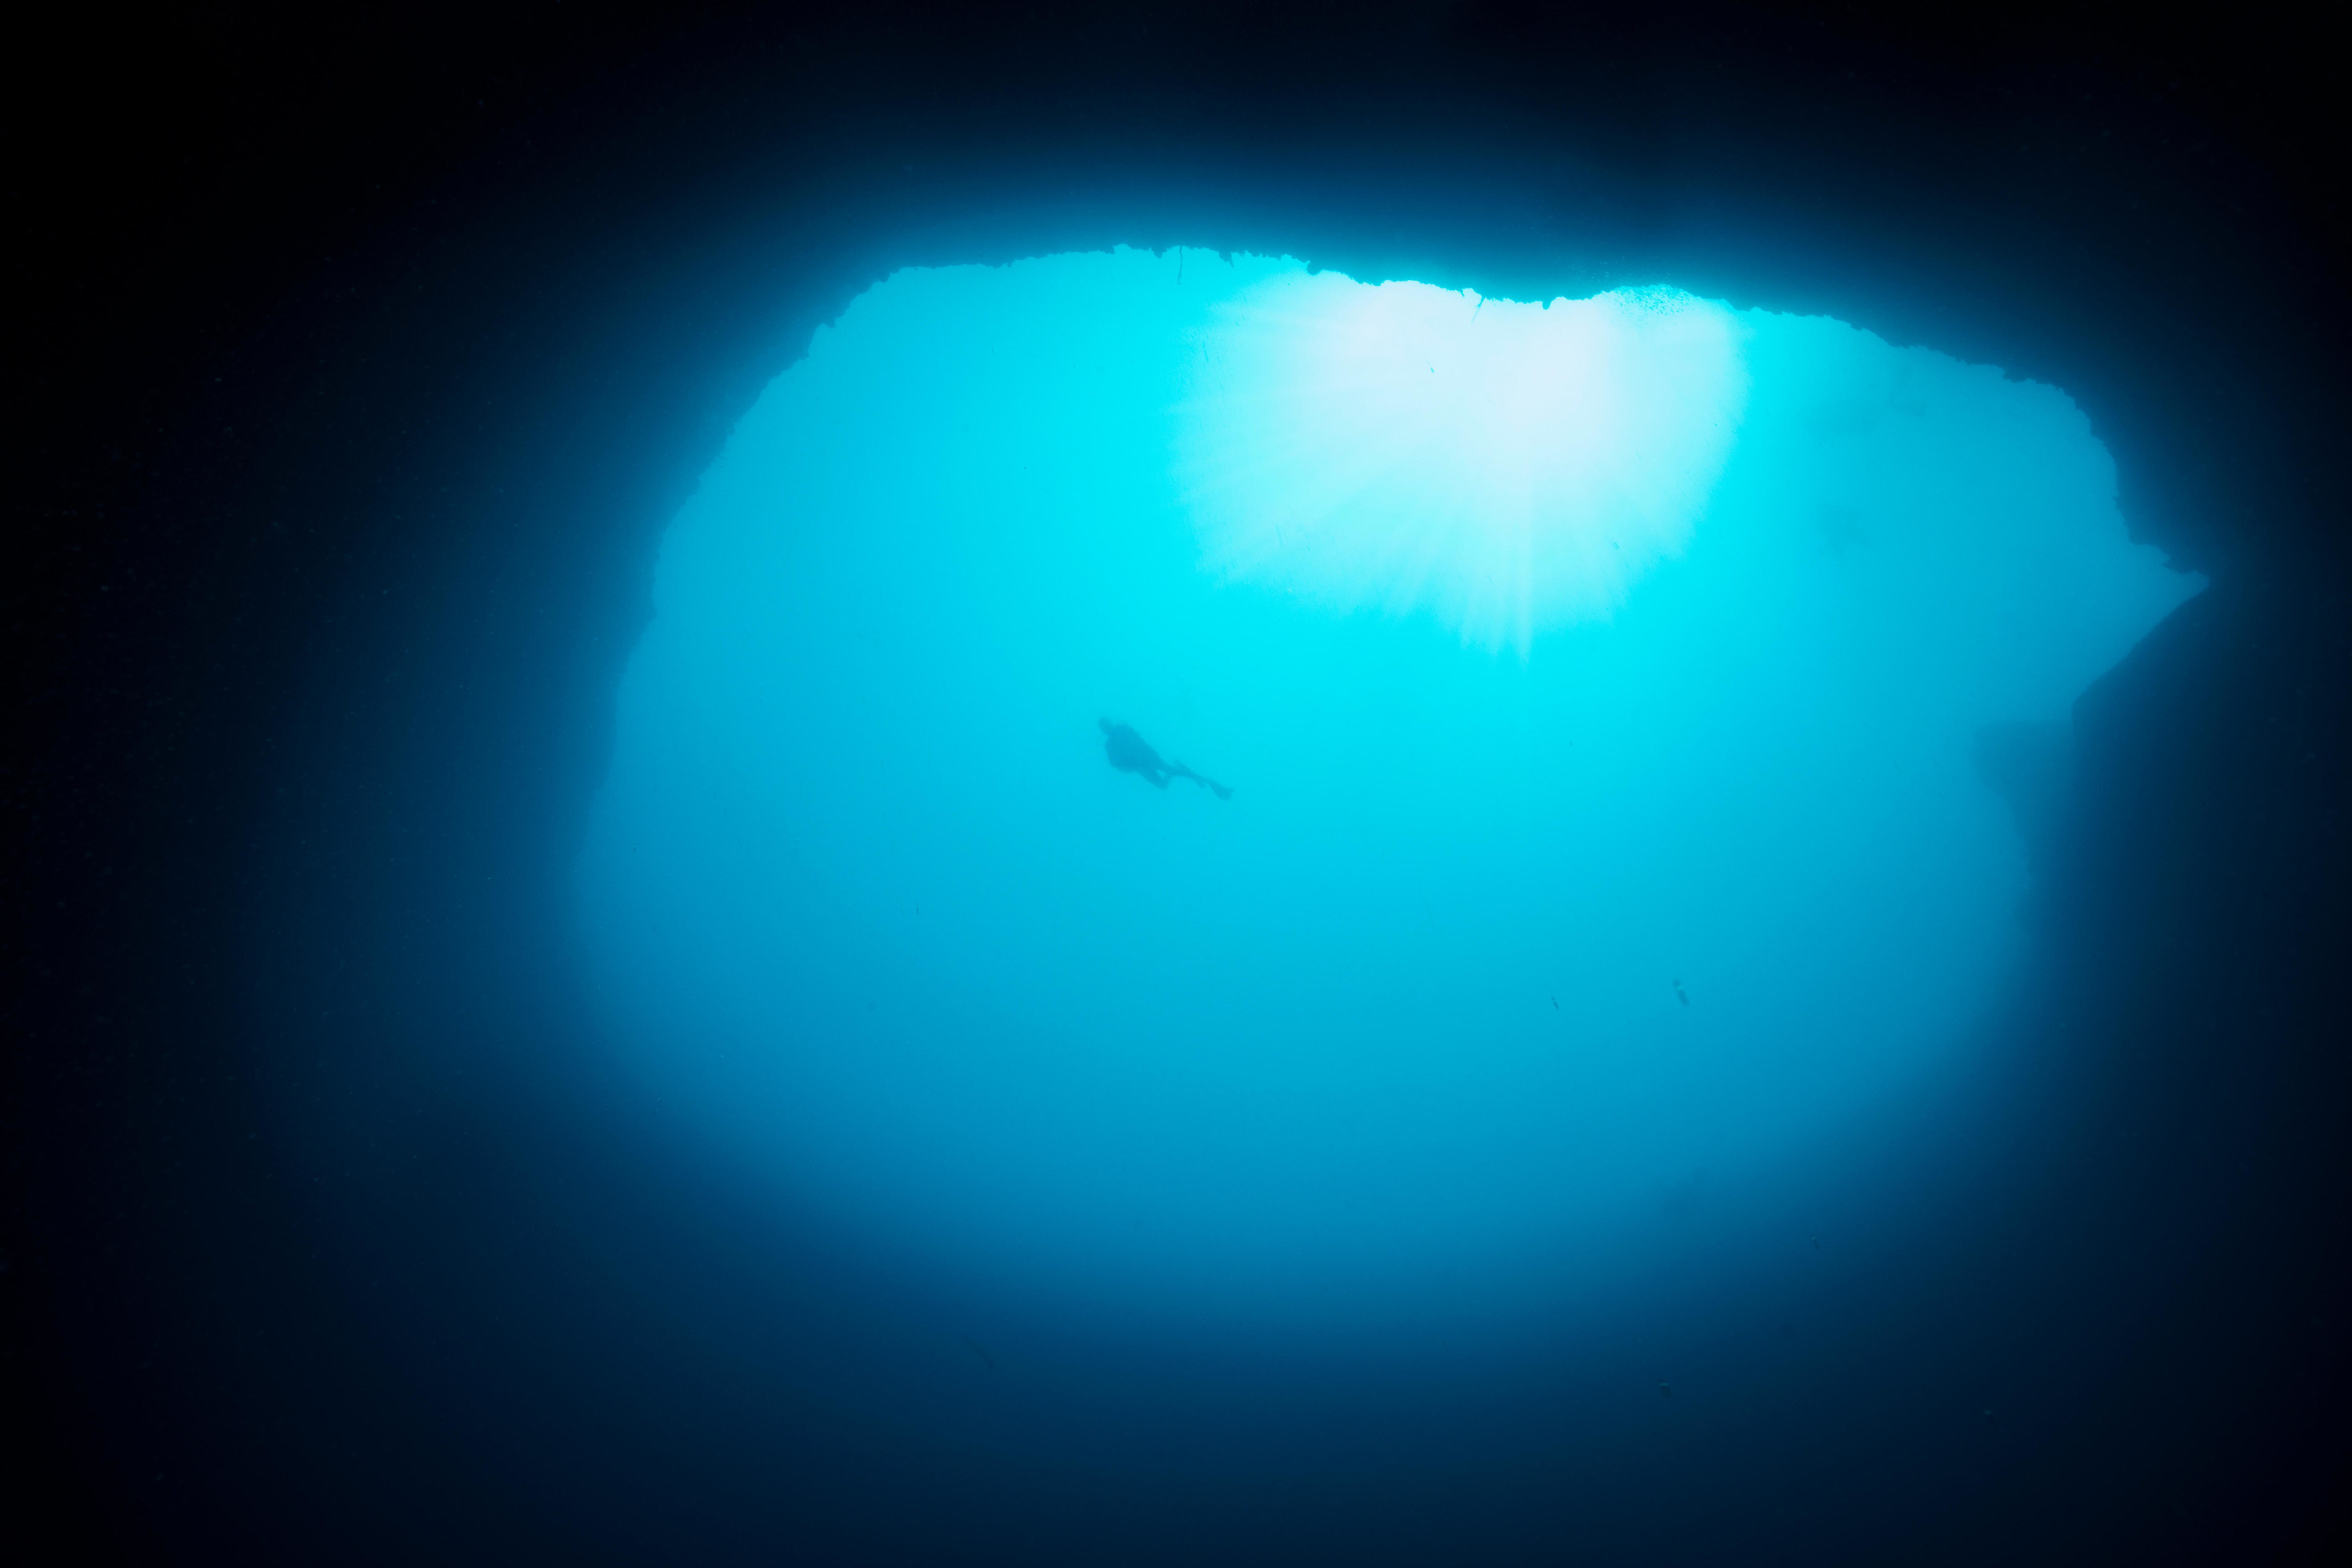 A huge hole with bluish light of different shades, with a diver visible